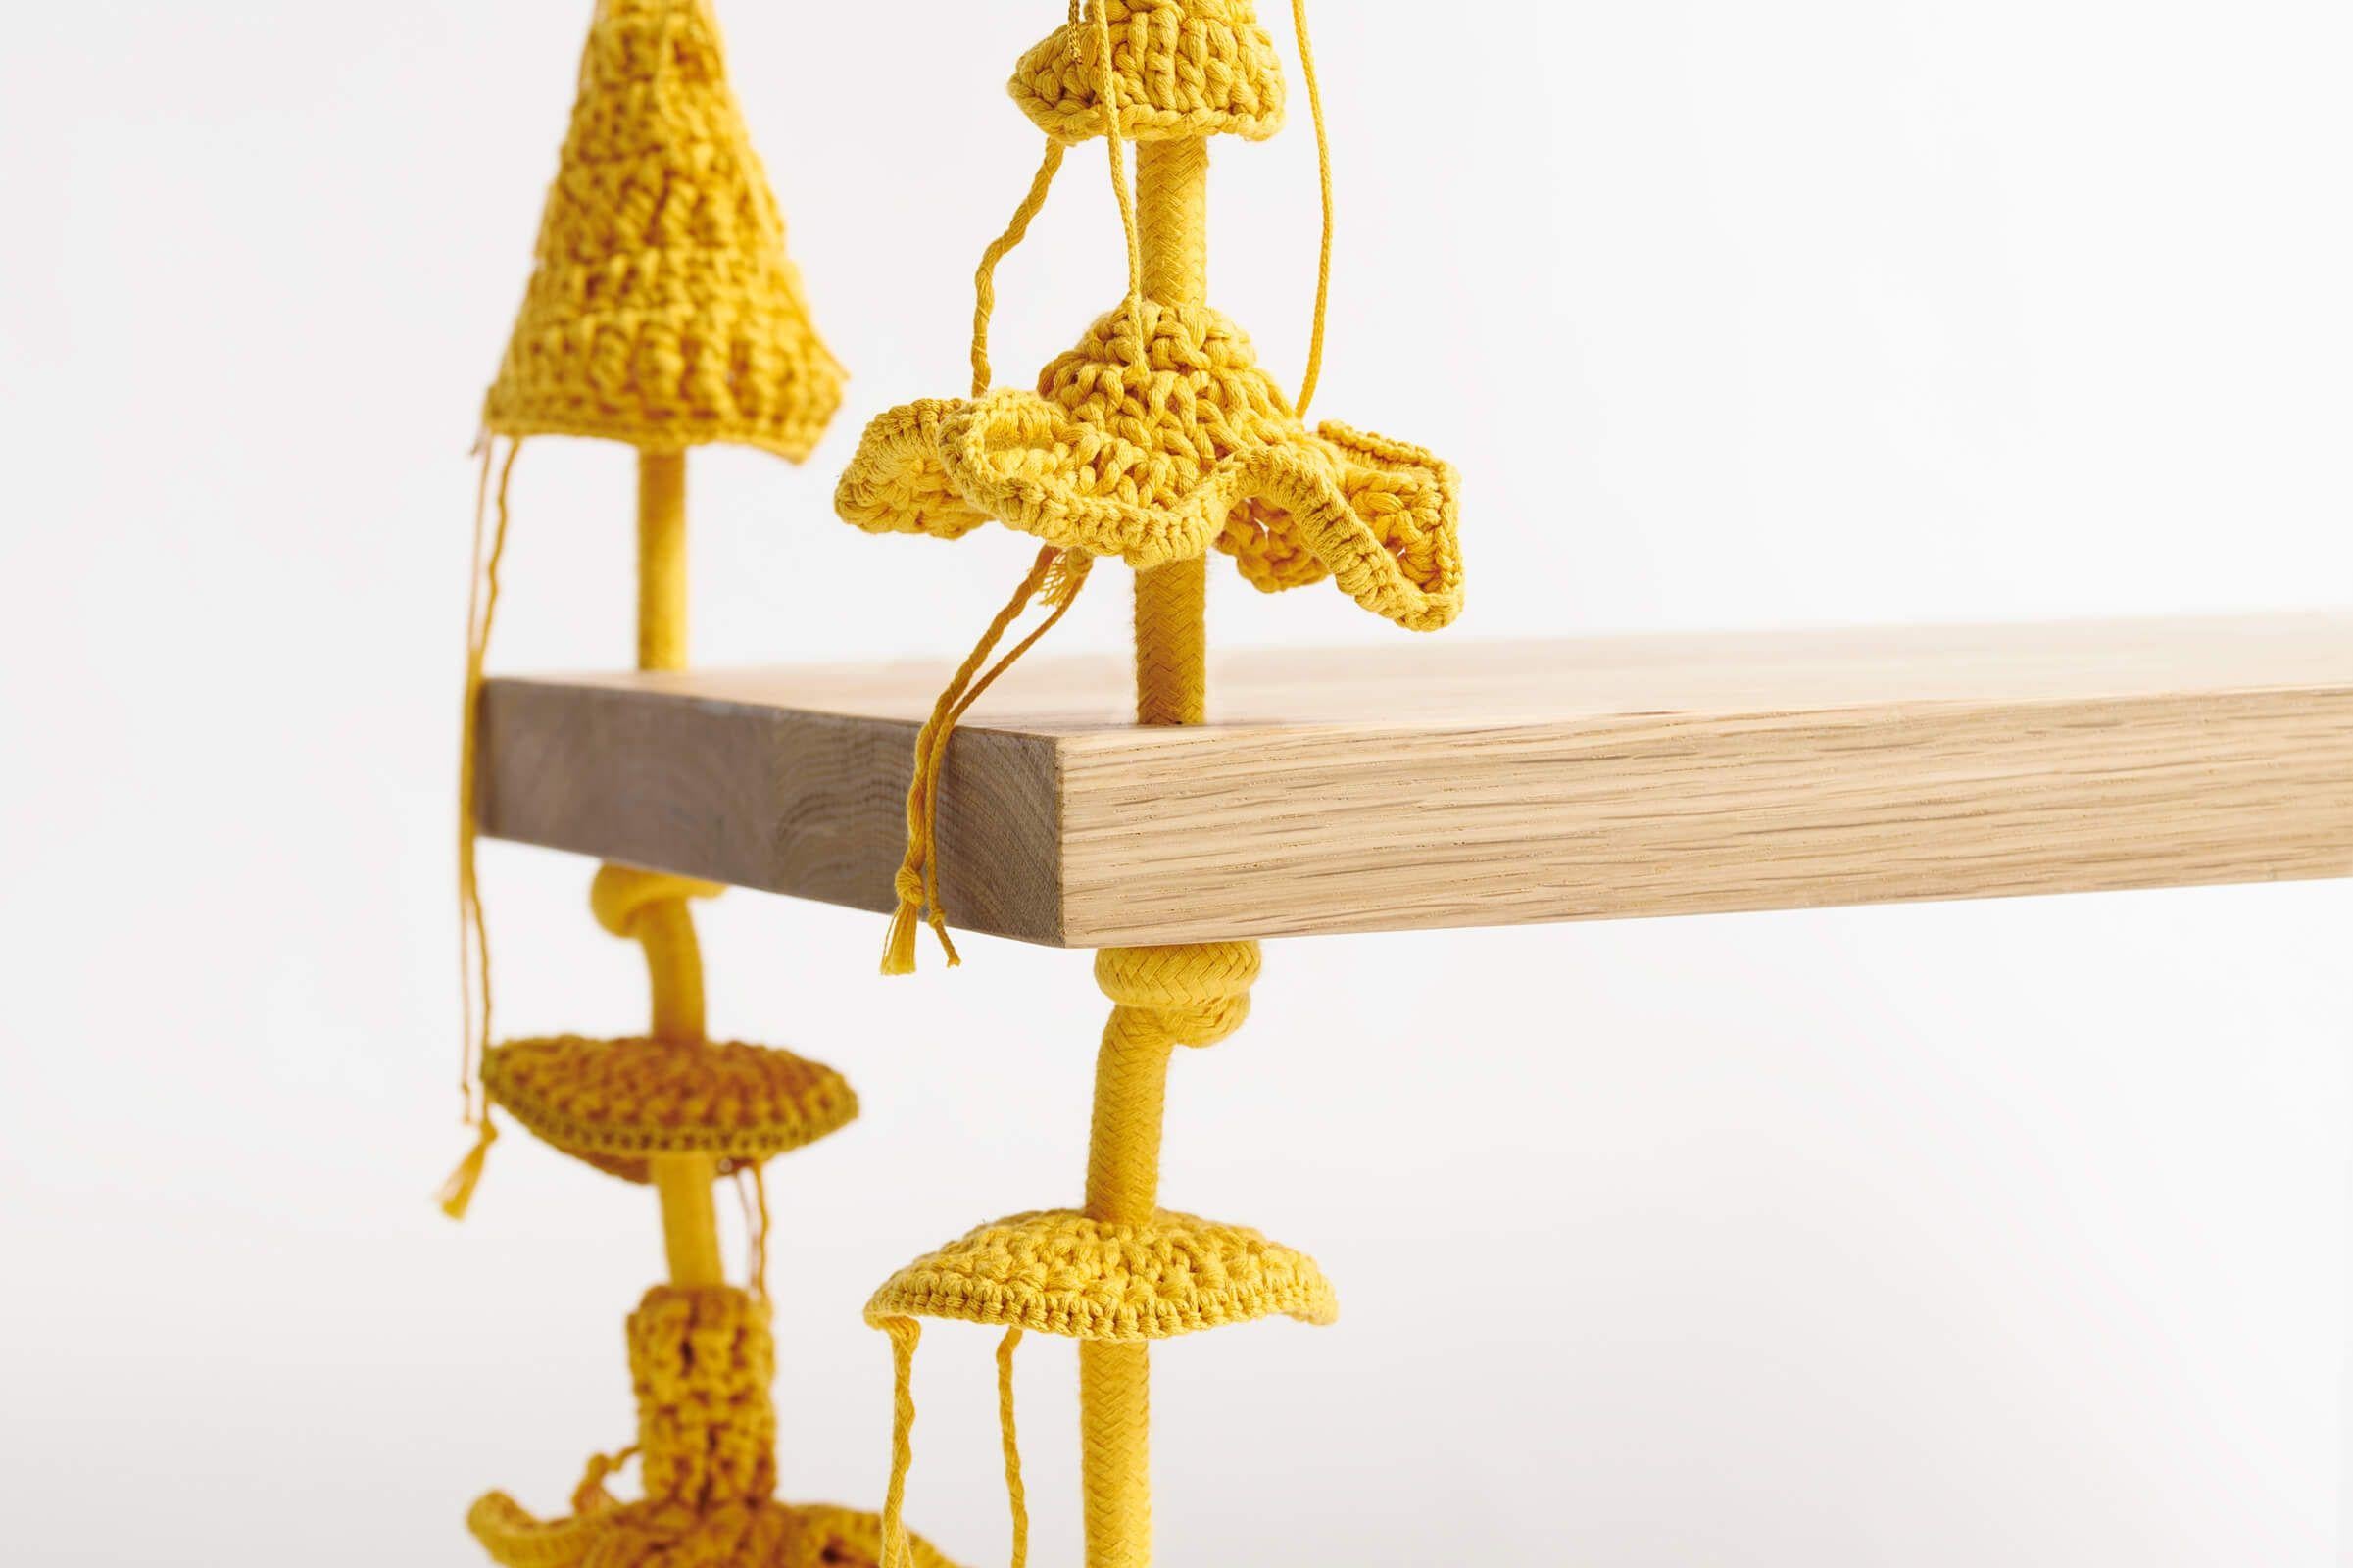 IOTA swings take the user to a wild, natural, fantastic place. The swings work great in living rooms, spacious bedrooms or hotel lobbies and suites. The swing displays much of our special knitted handwork. The elements forming the swing are hand